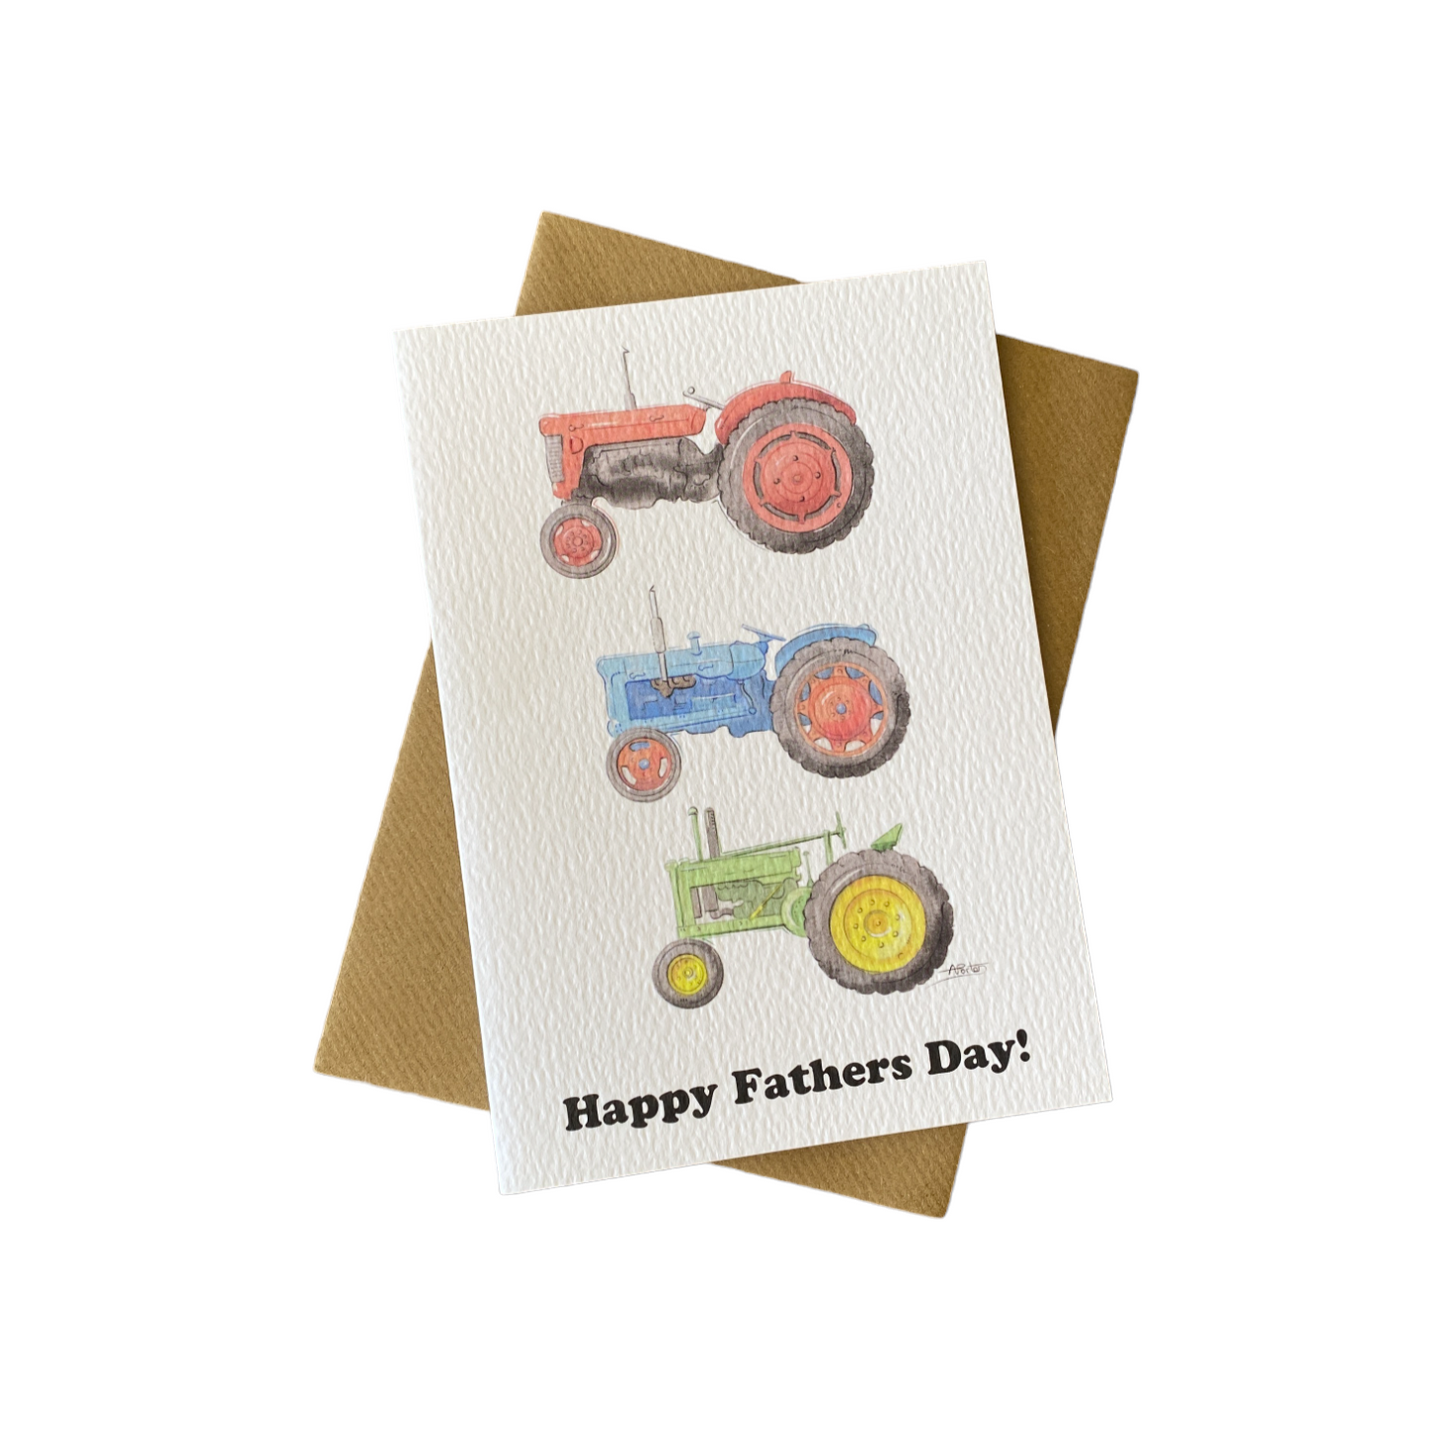 'Trio of Tractors' Fathers Day card